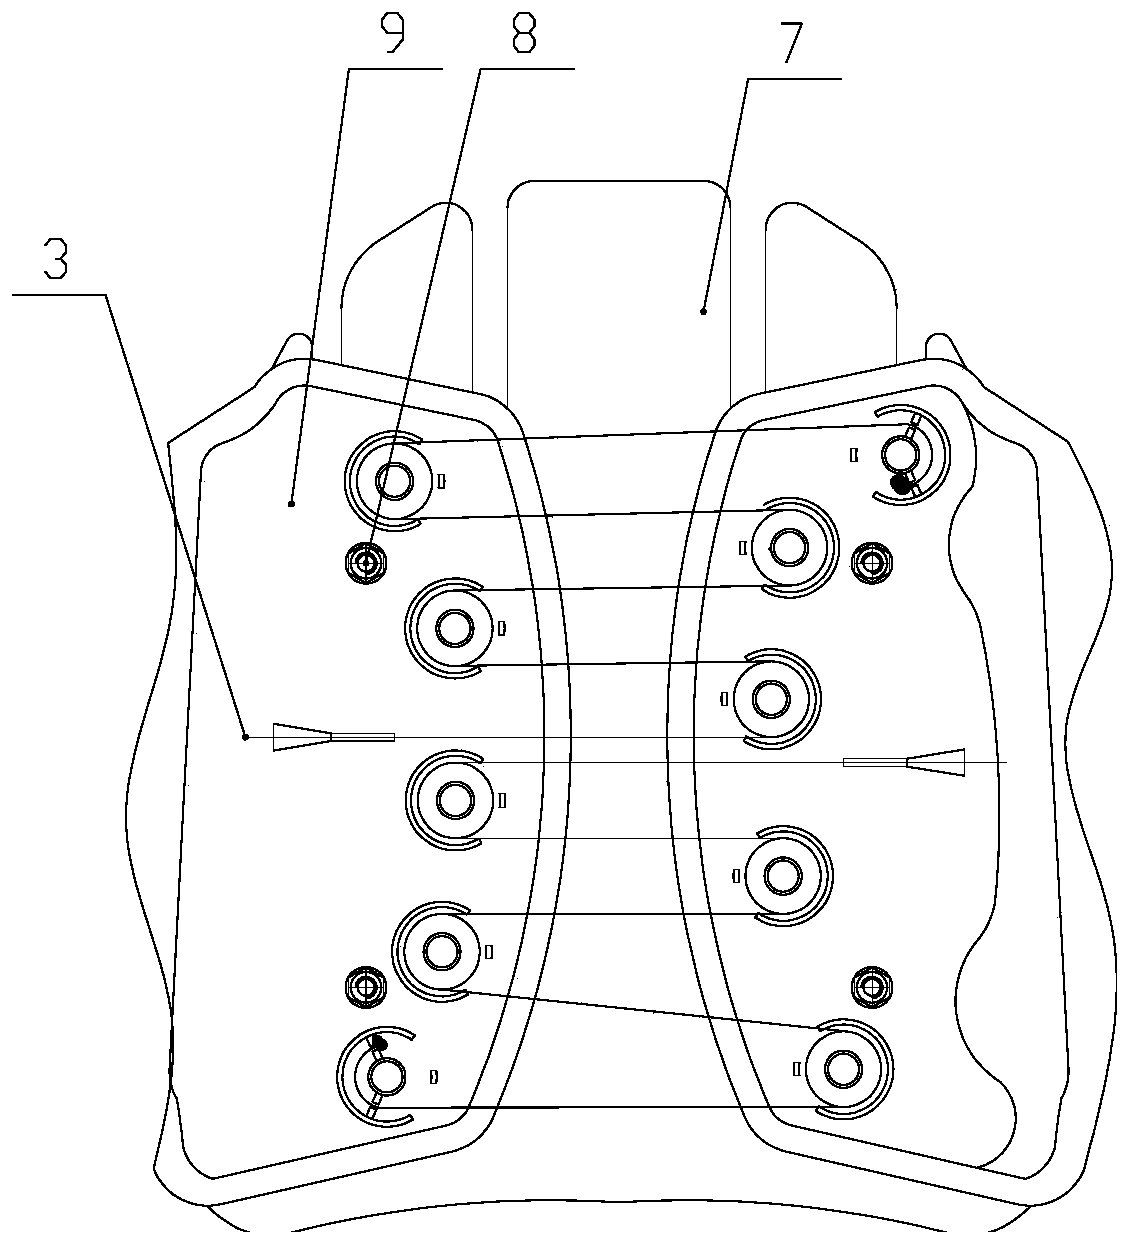 Pulley assisted telescopic integrated supporting waist supporter